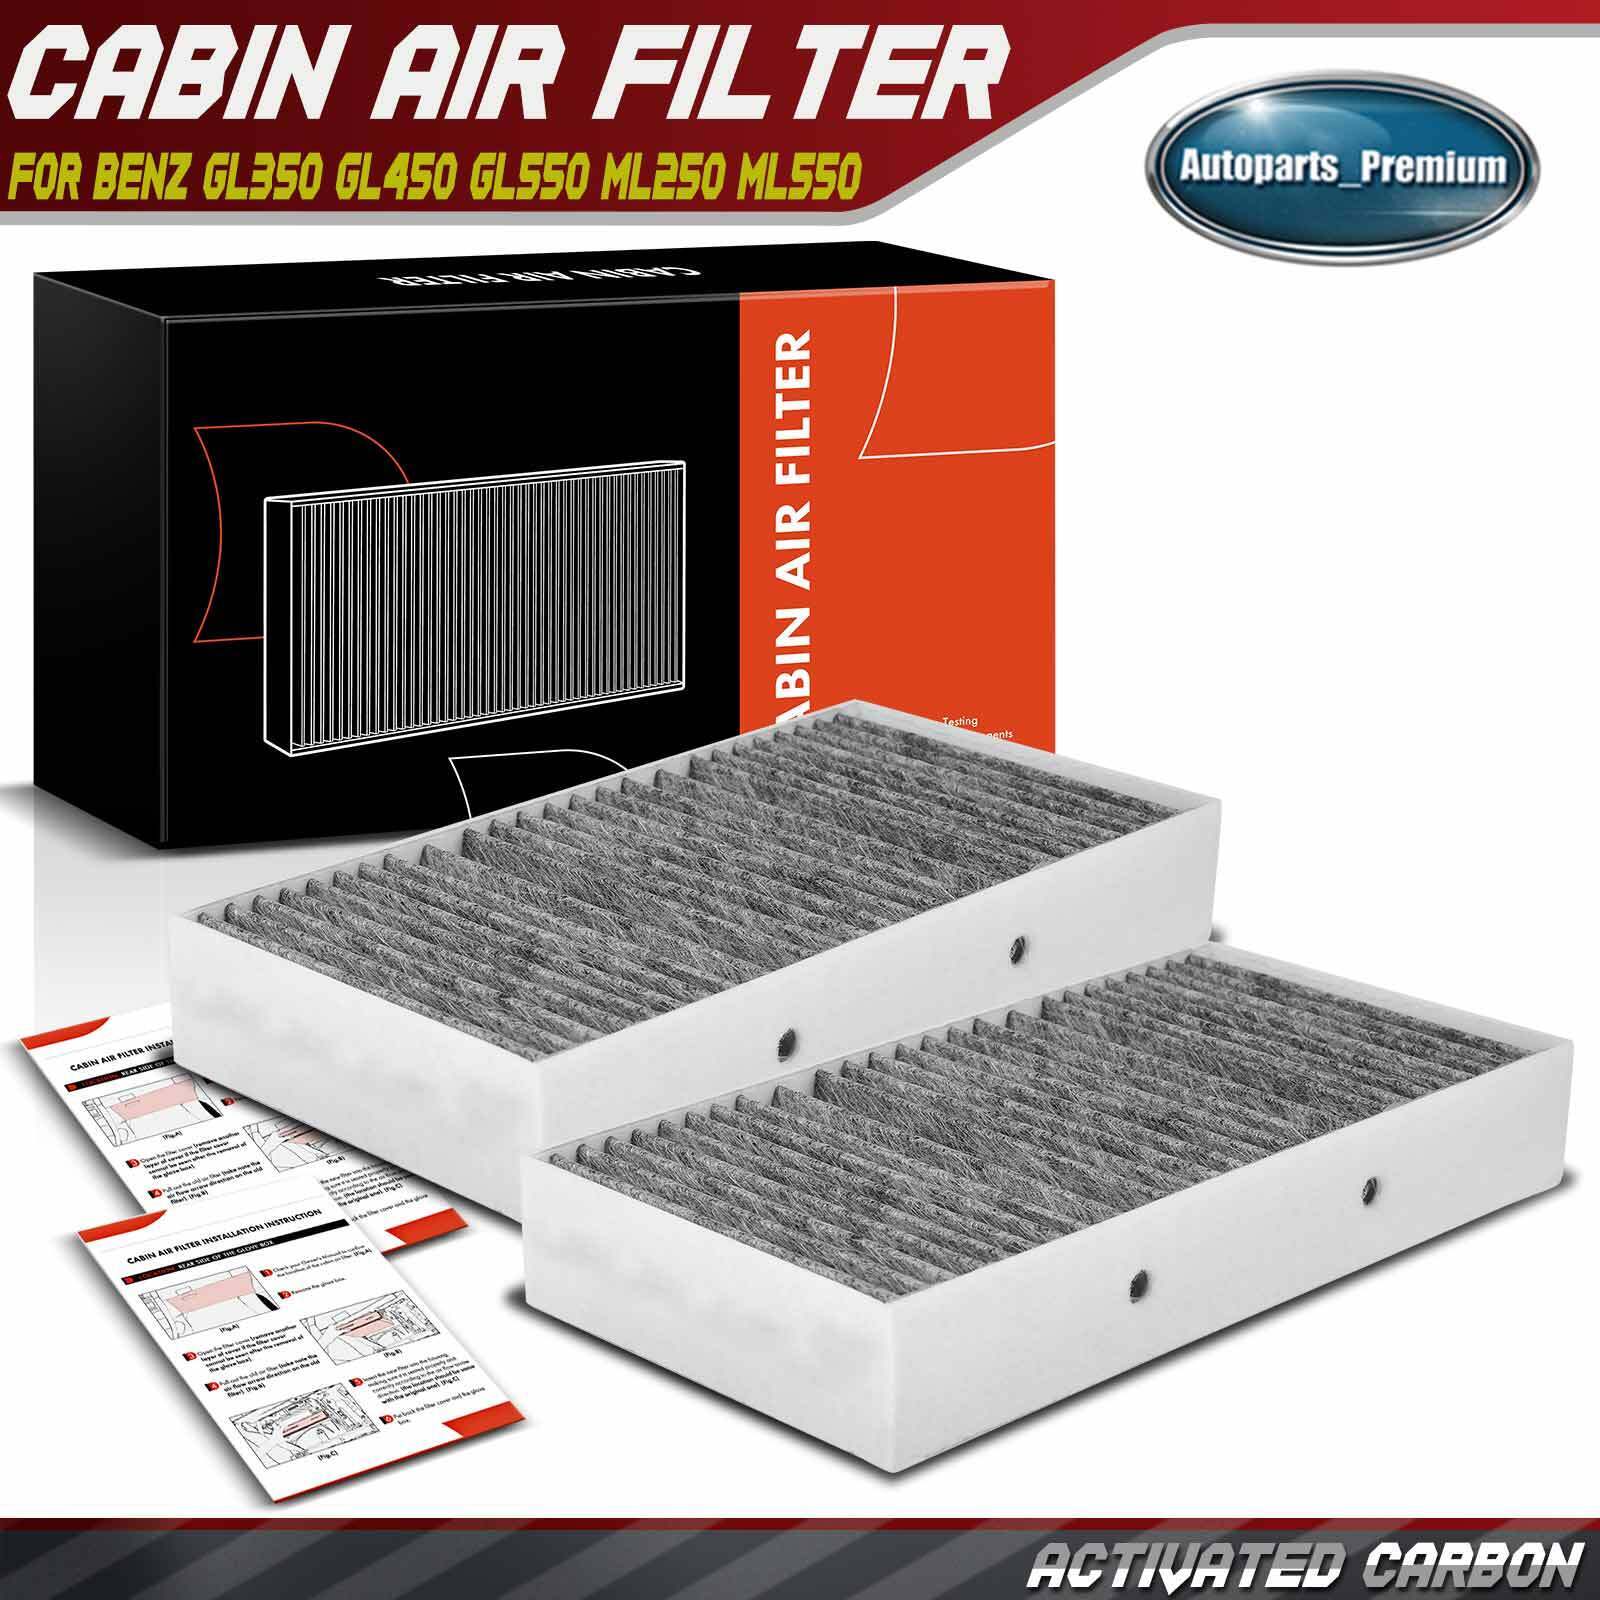 2x Activated Carbon Cabin Air Filter for Mercedes-Benz GL450 GL550  ML250 ML550